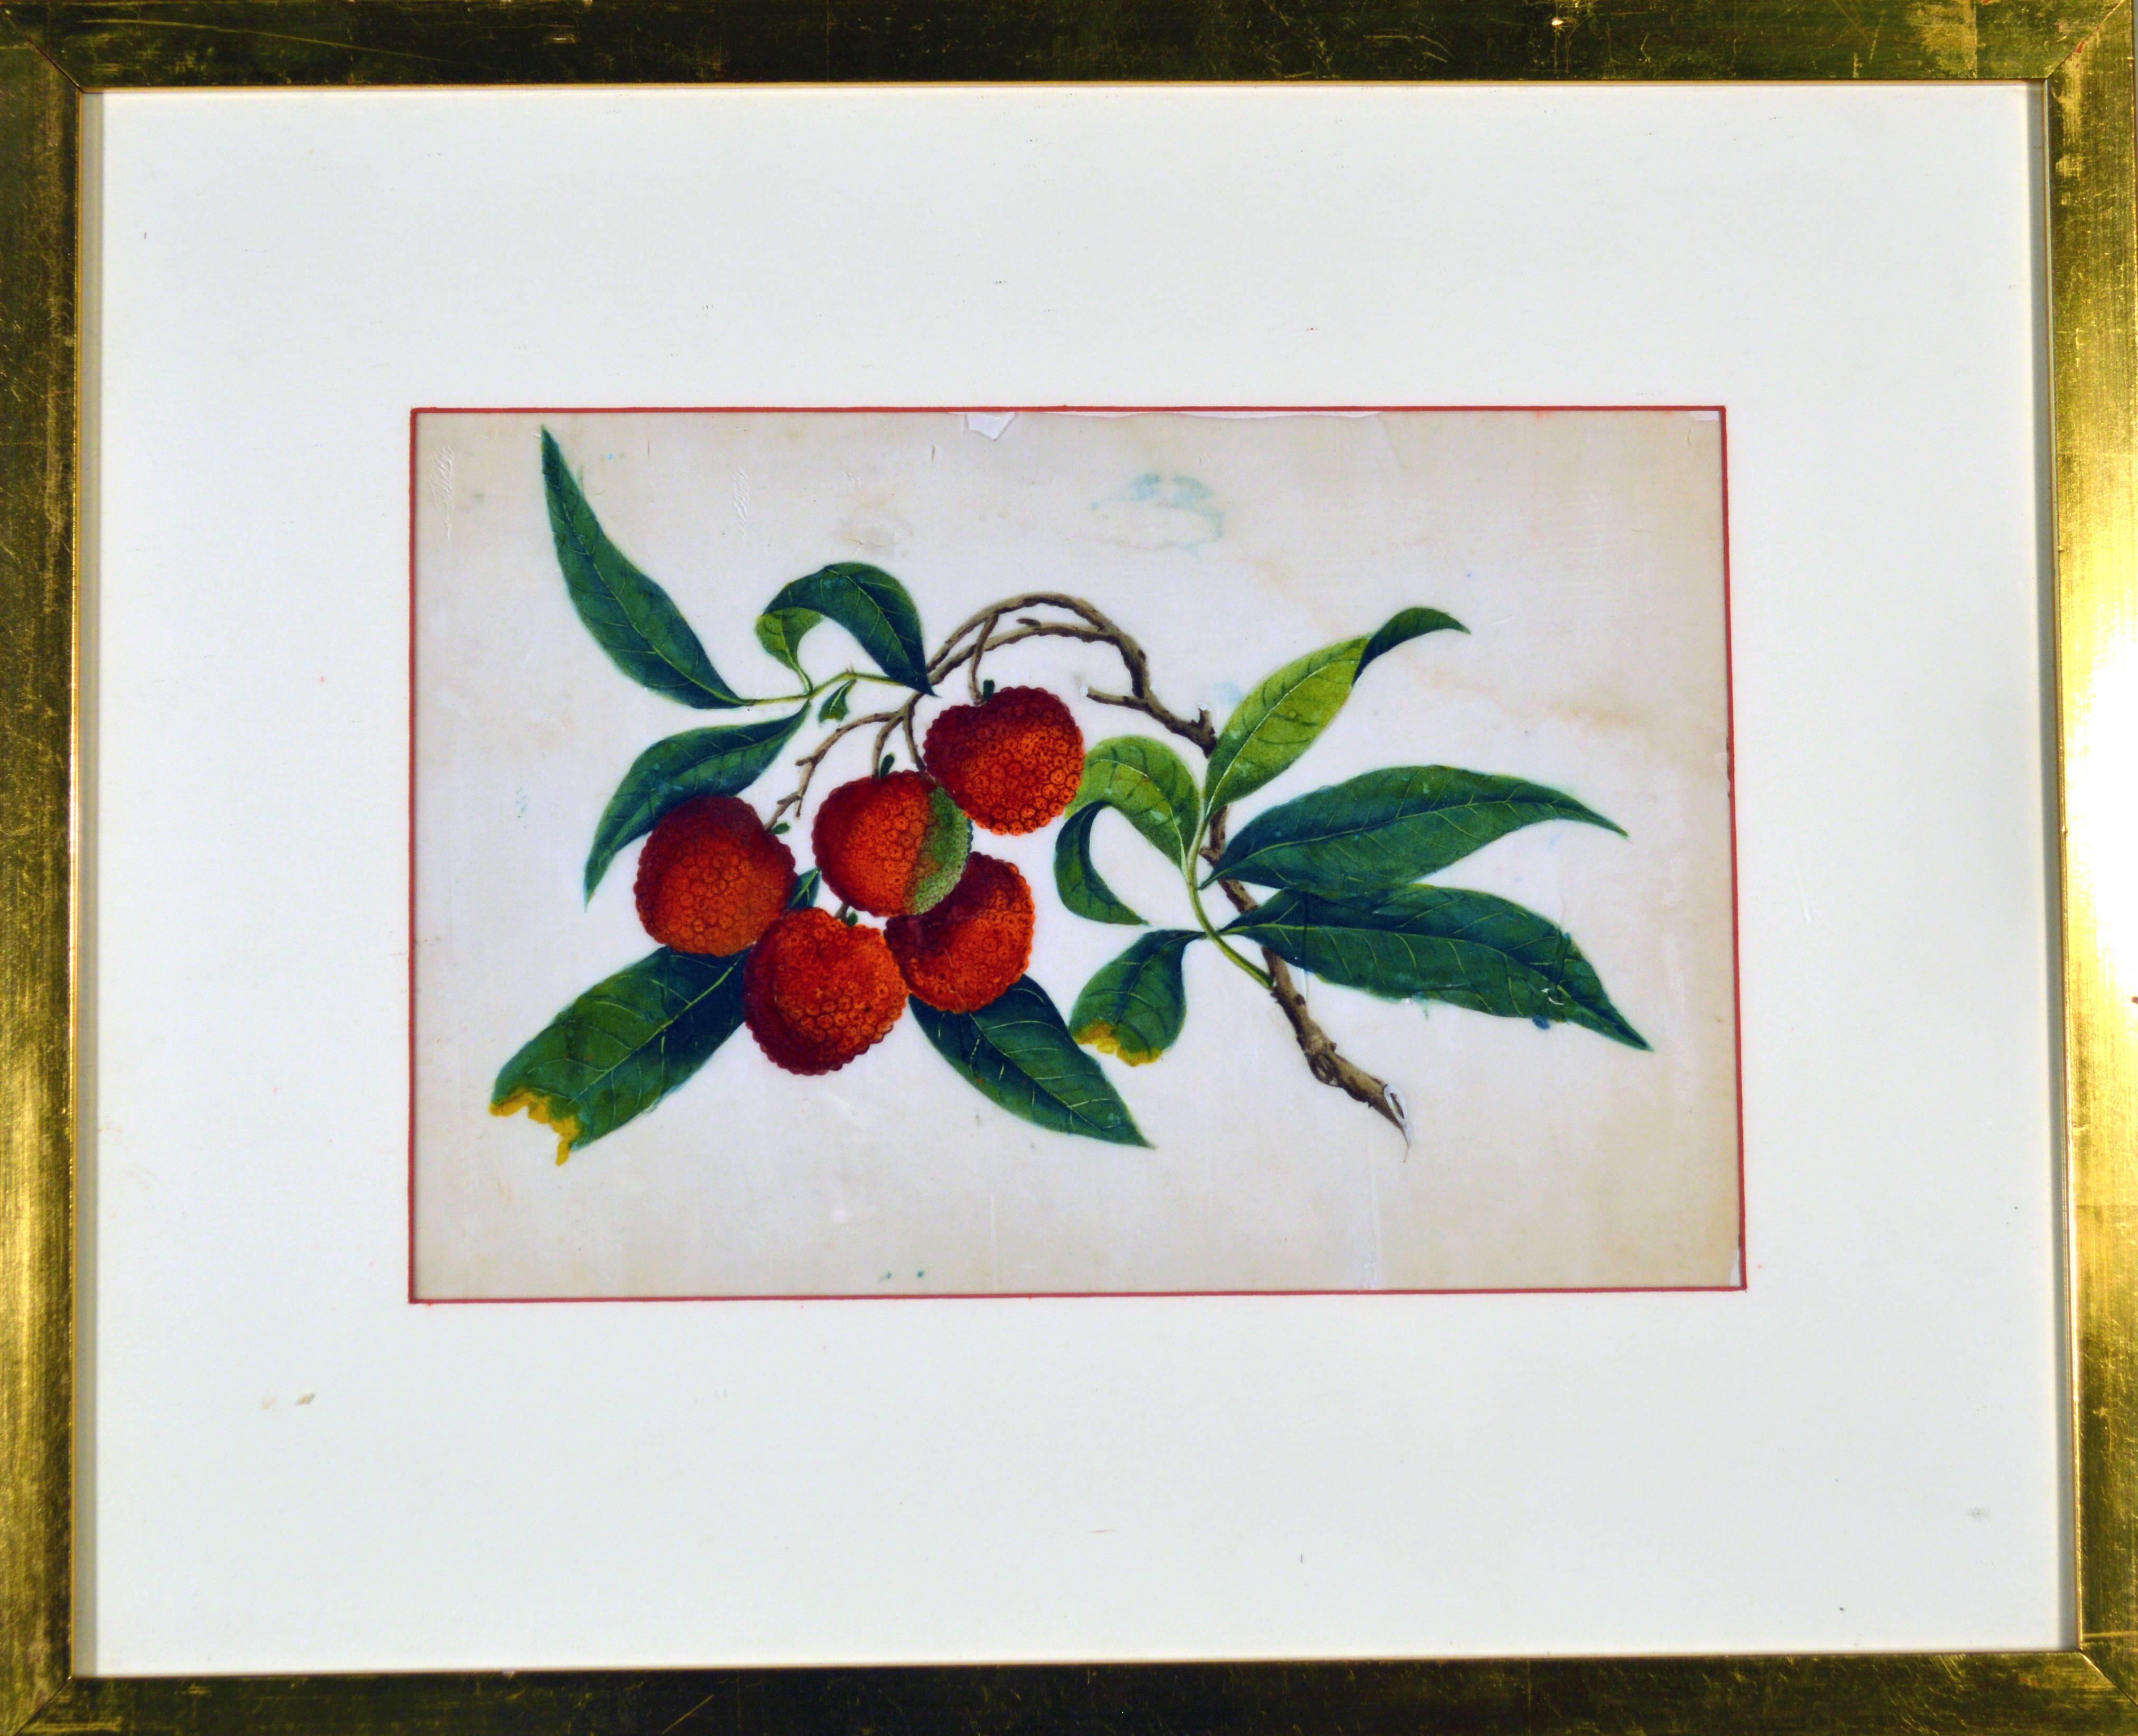 The 19th century Chinese watercolors on pith paper of plants and vegetables within a gilt frame are wonderfully naive and charming.